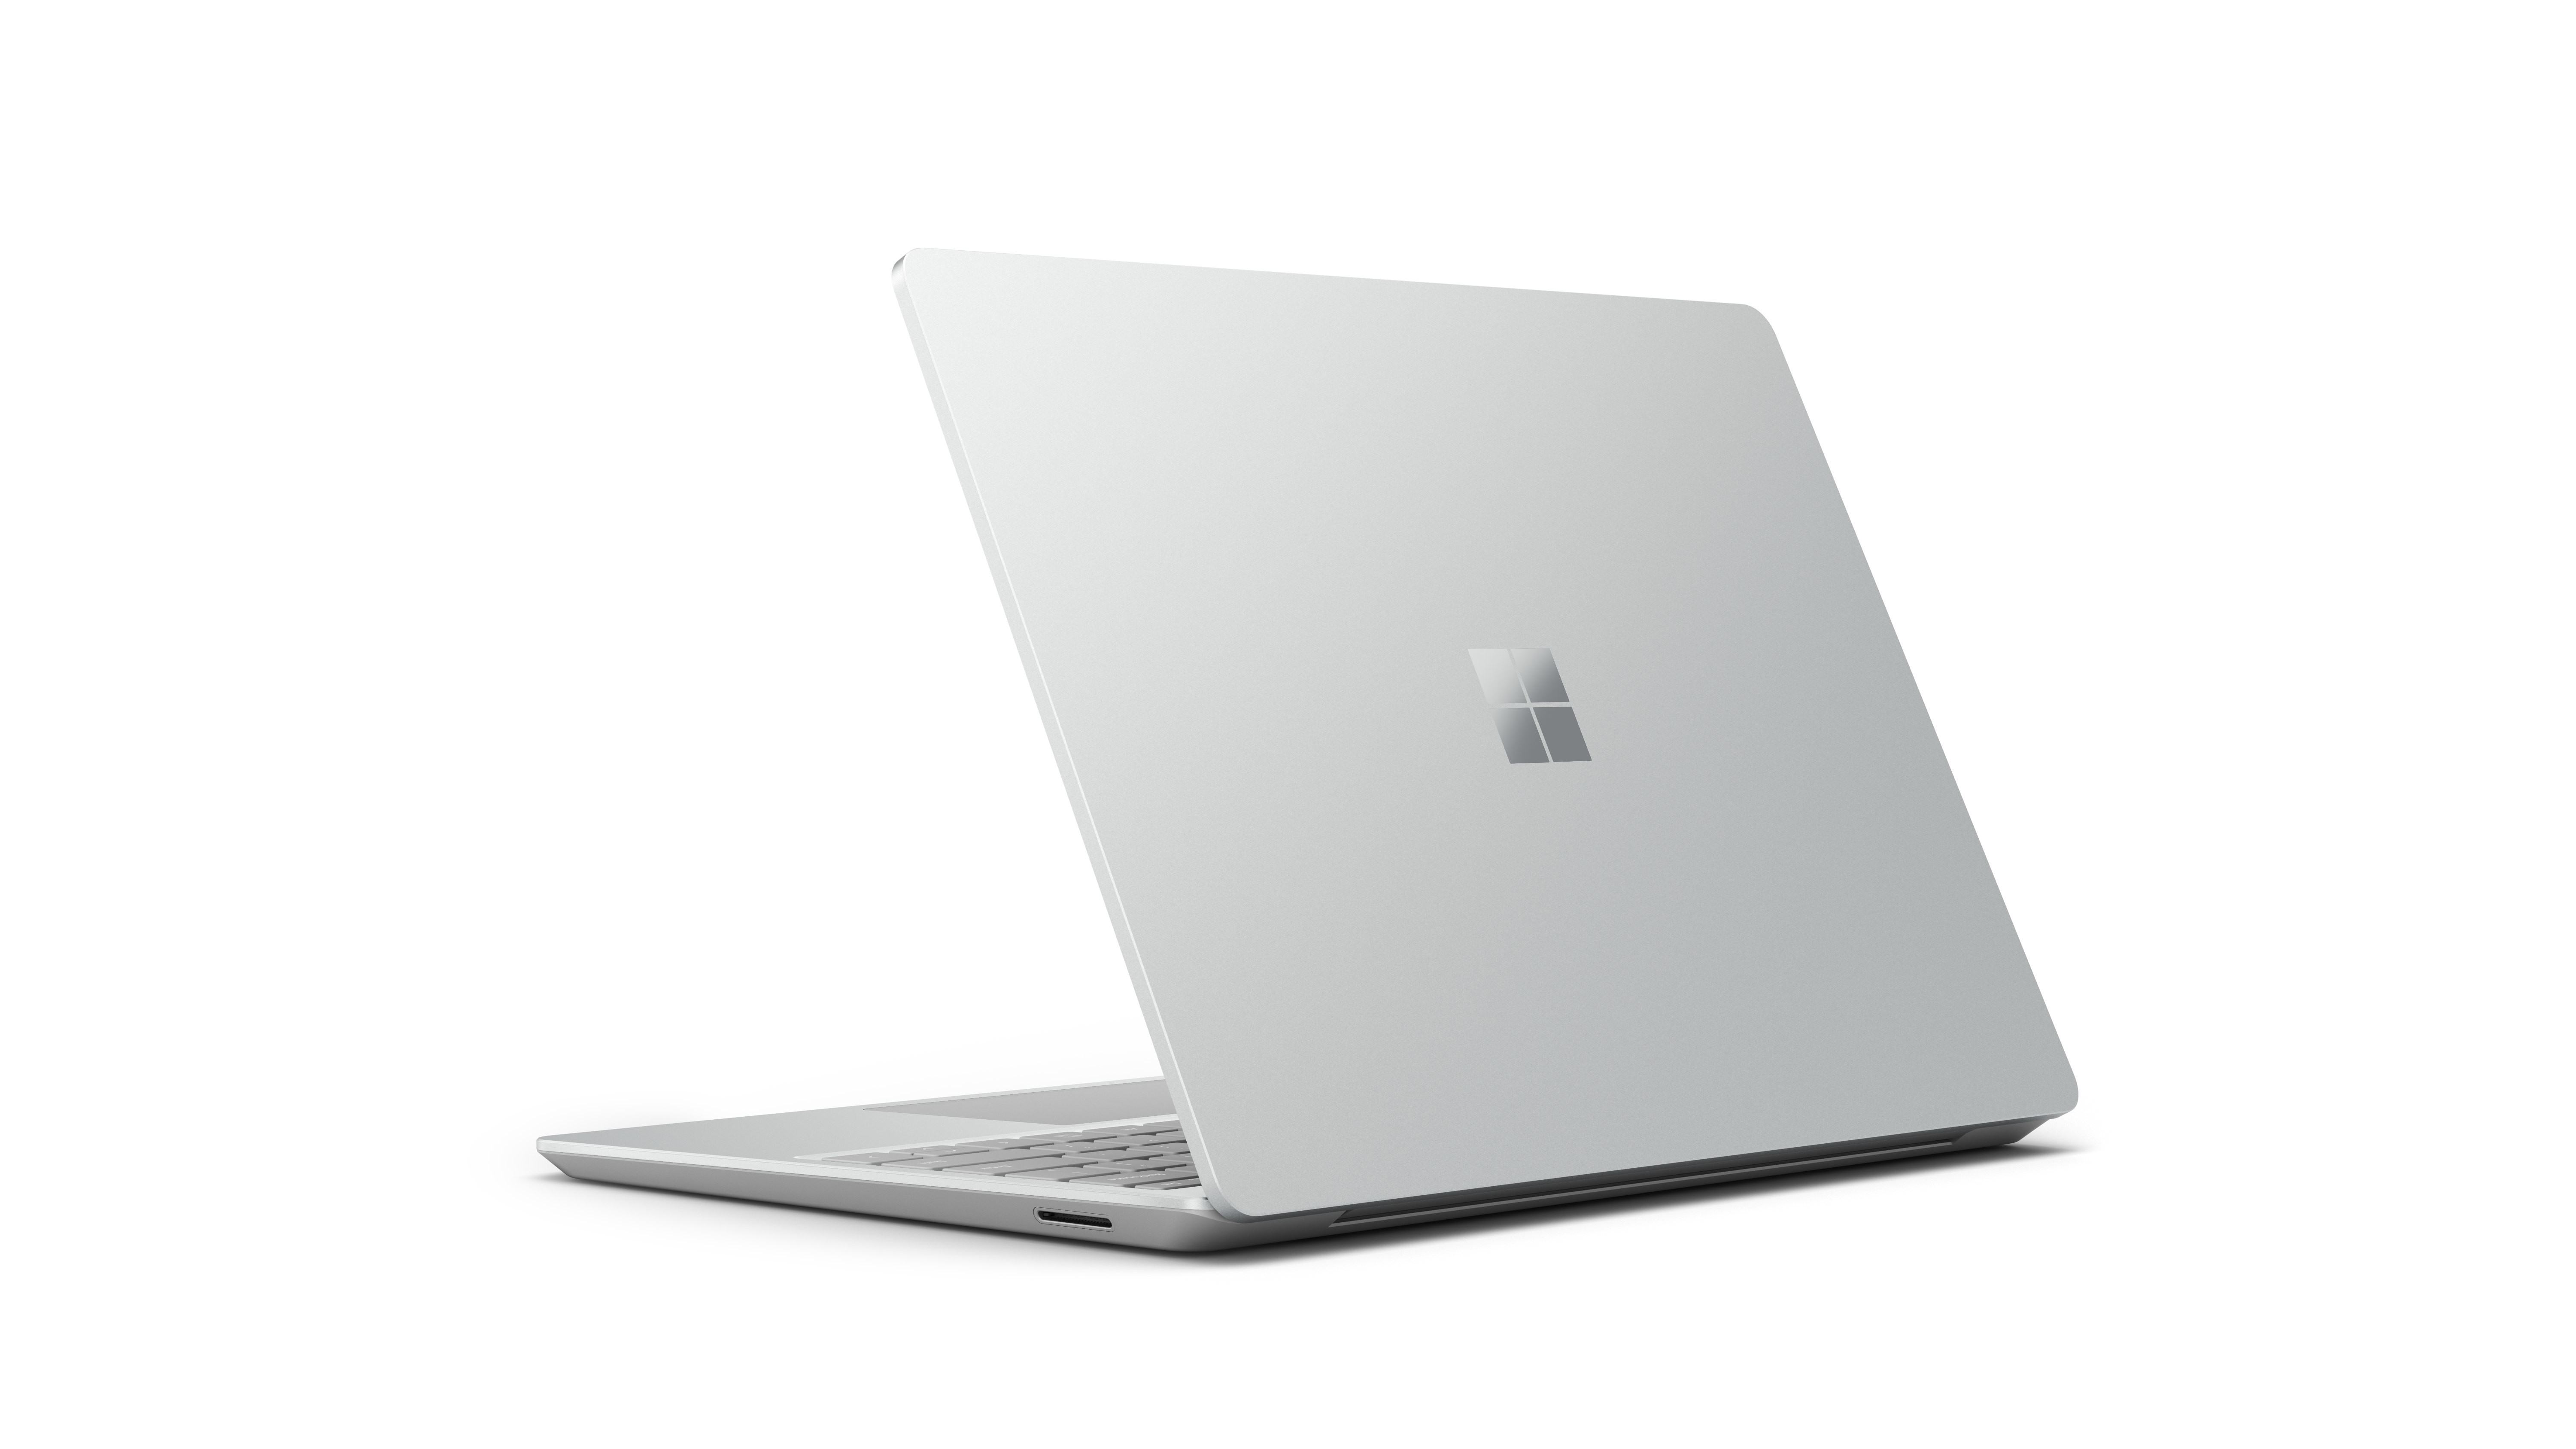 Microsoft Surface Laptop Go i5-1035G1 4GB 64GB eMMC 12.4 Touch W10 Home S Platinum